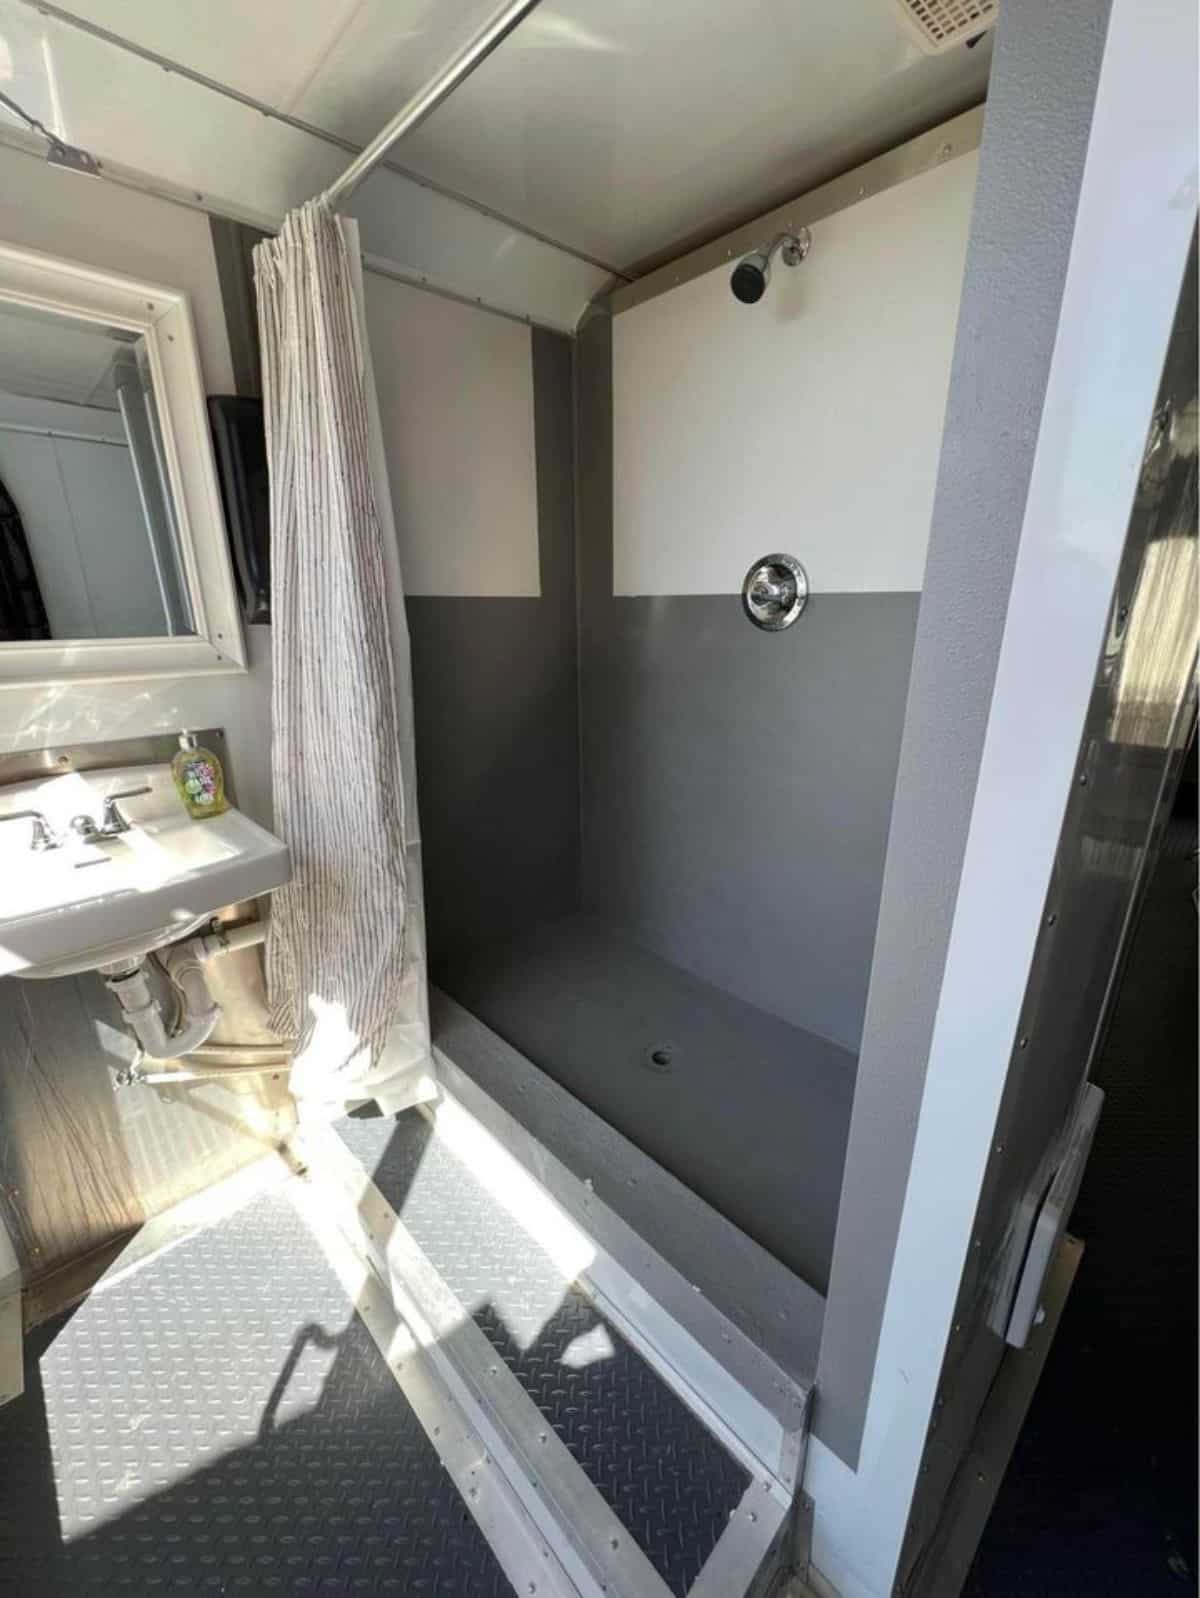 bathroom of tiny trailer home has standard fittings and separate shower area